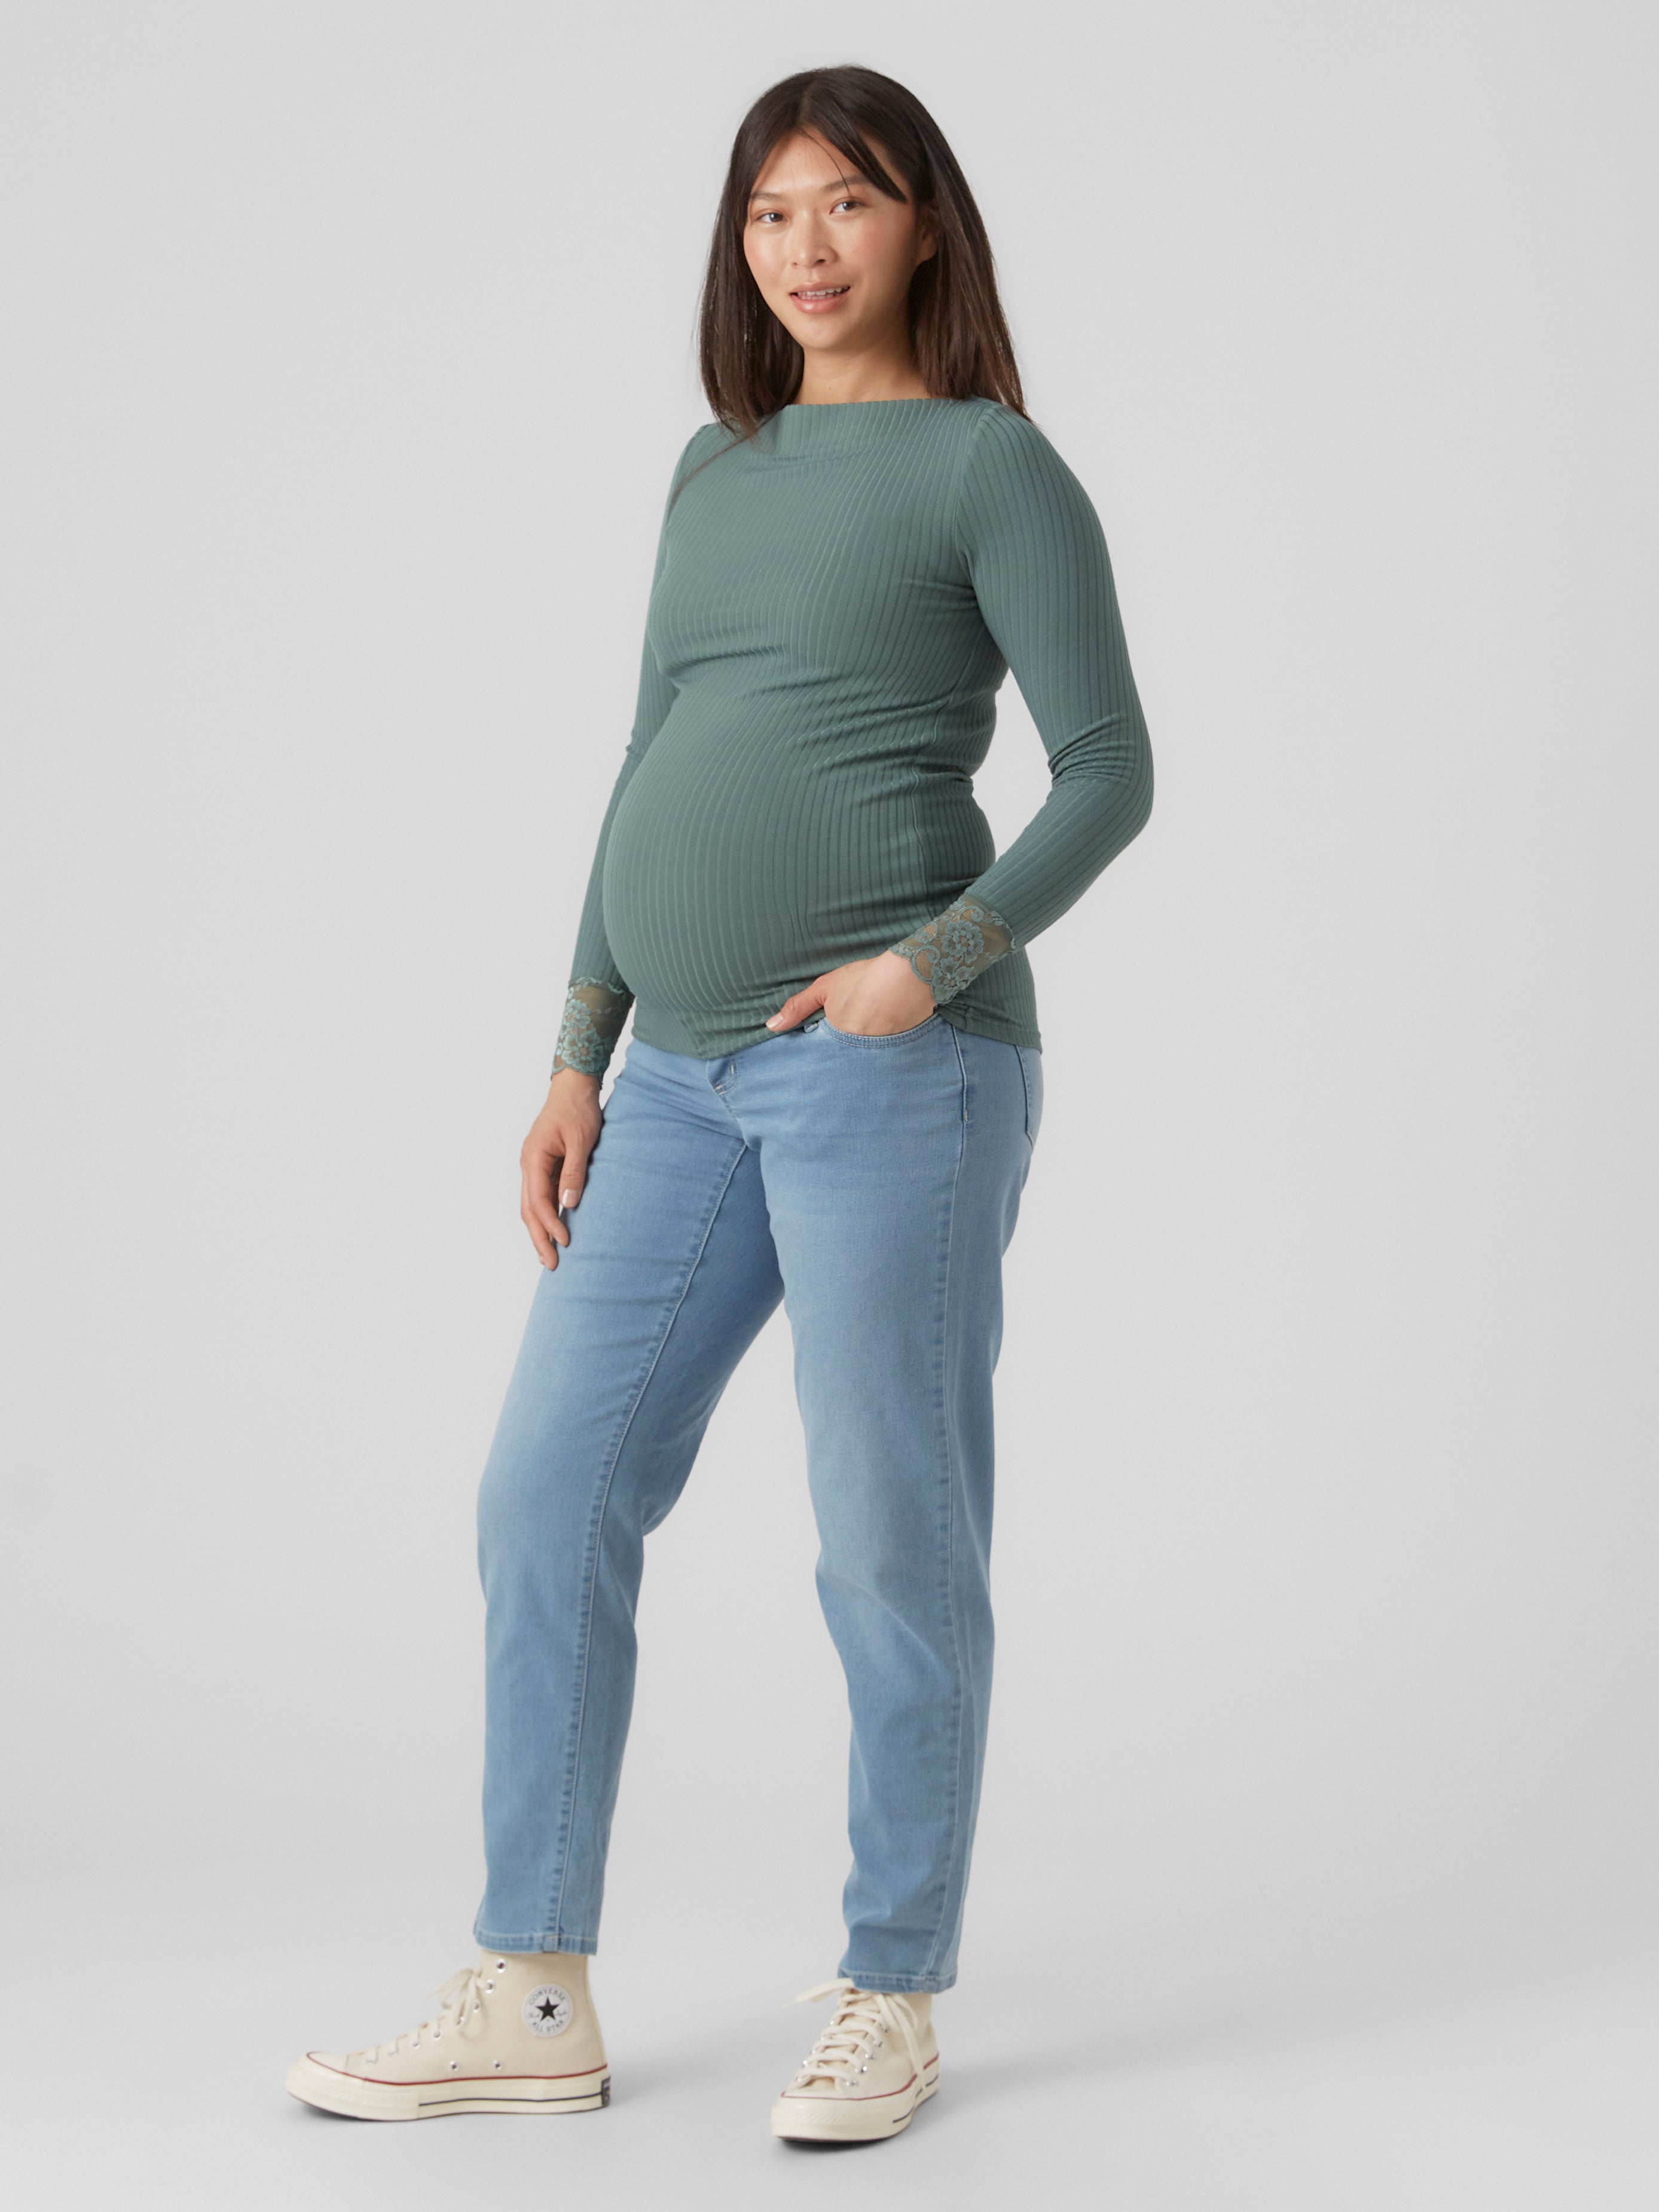 Planet Motherhood Maternity Women's Skinny Jeans with Overbelly Band -  Walmart.com